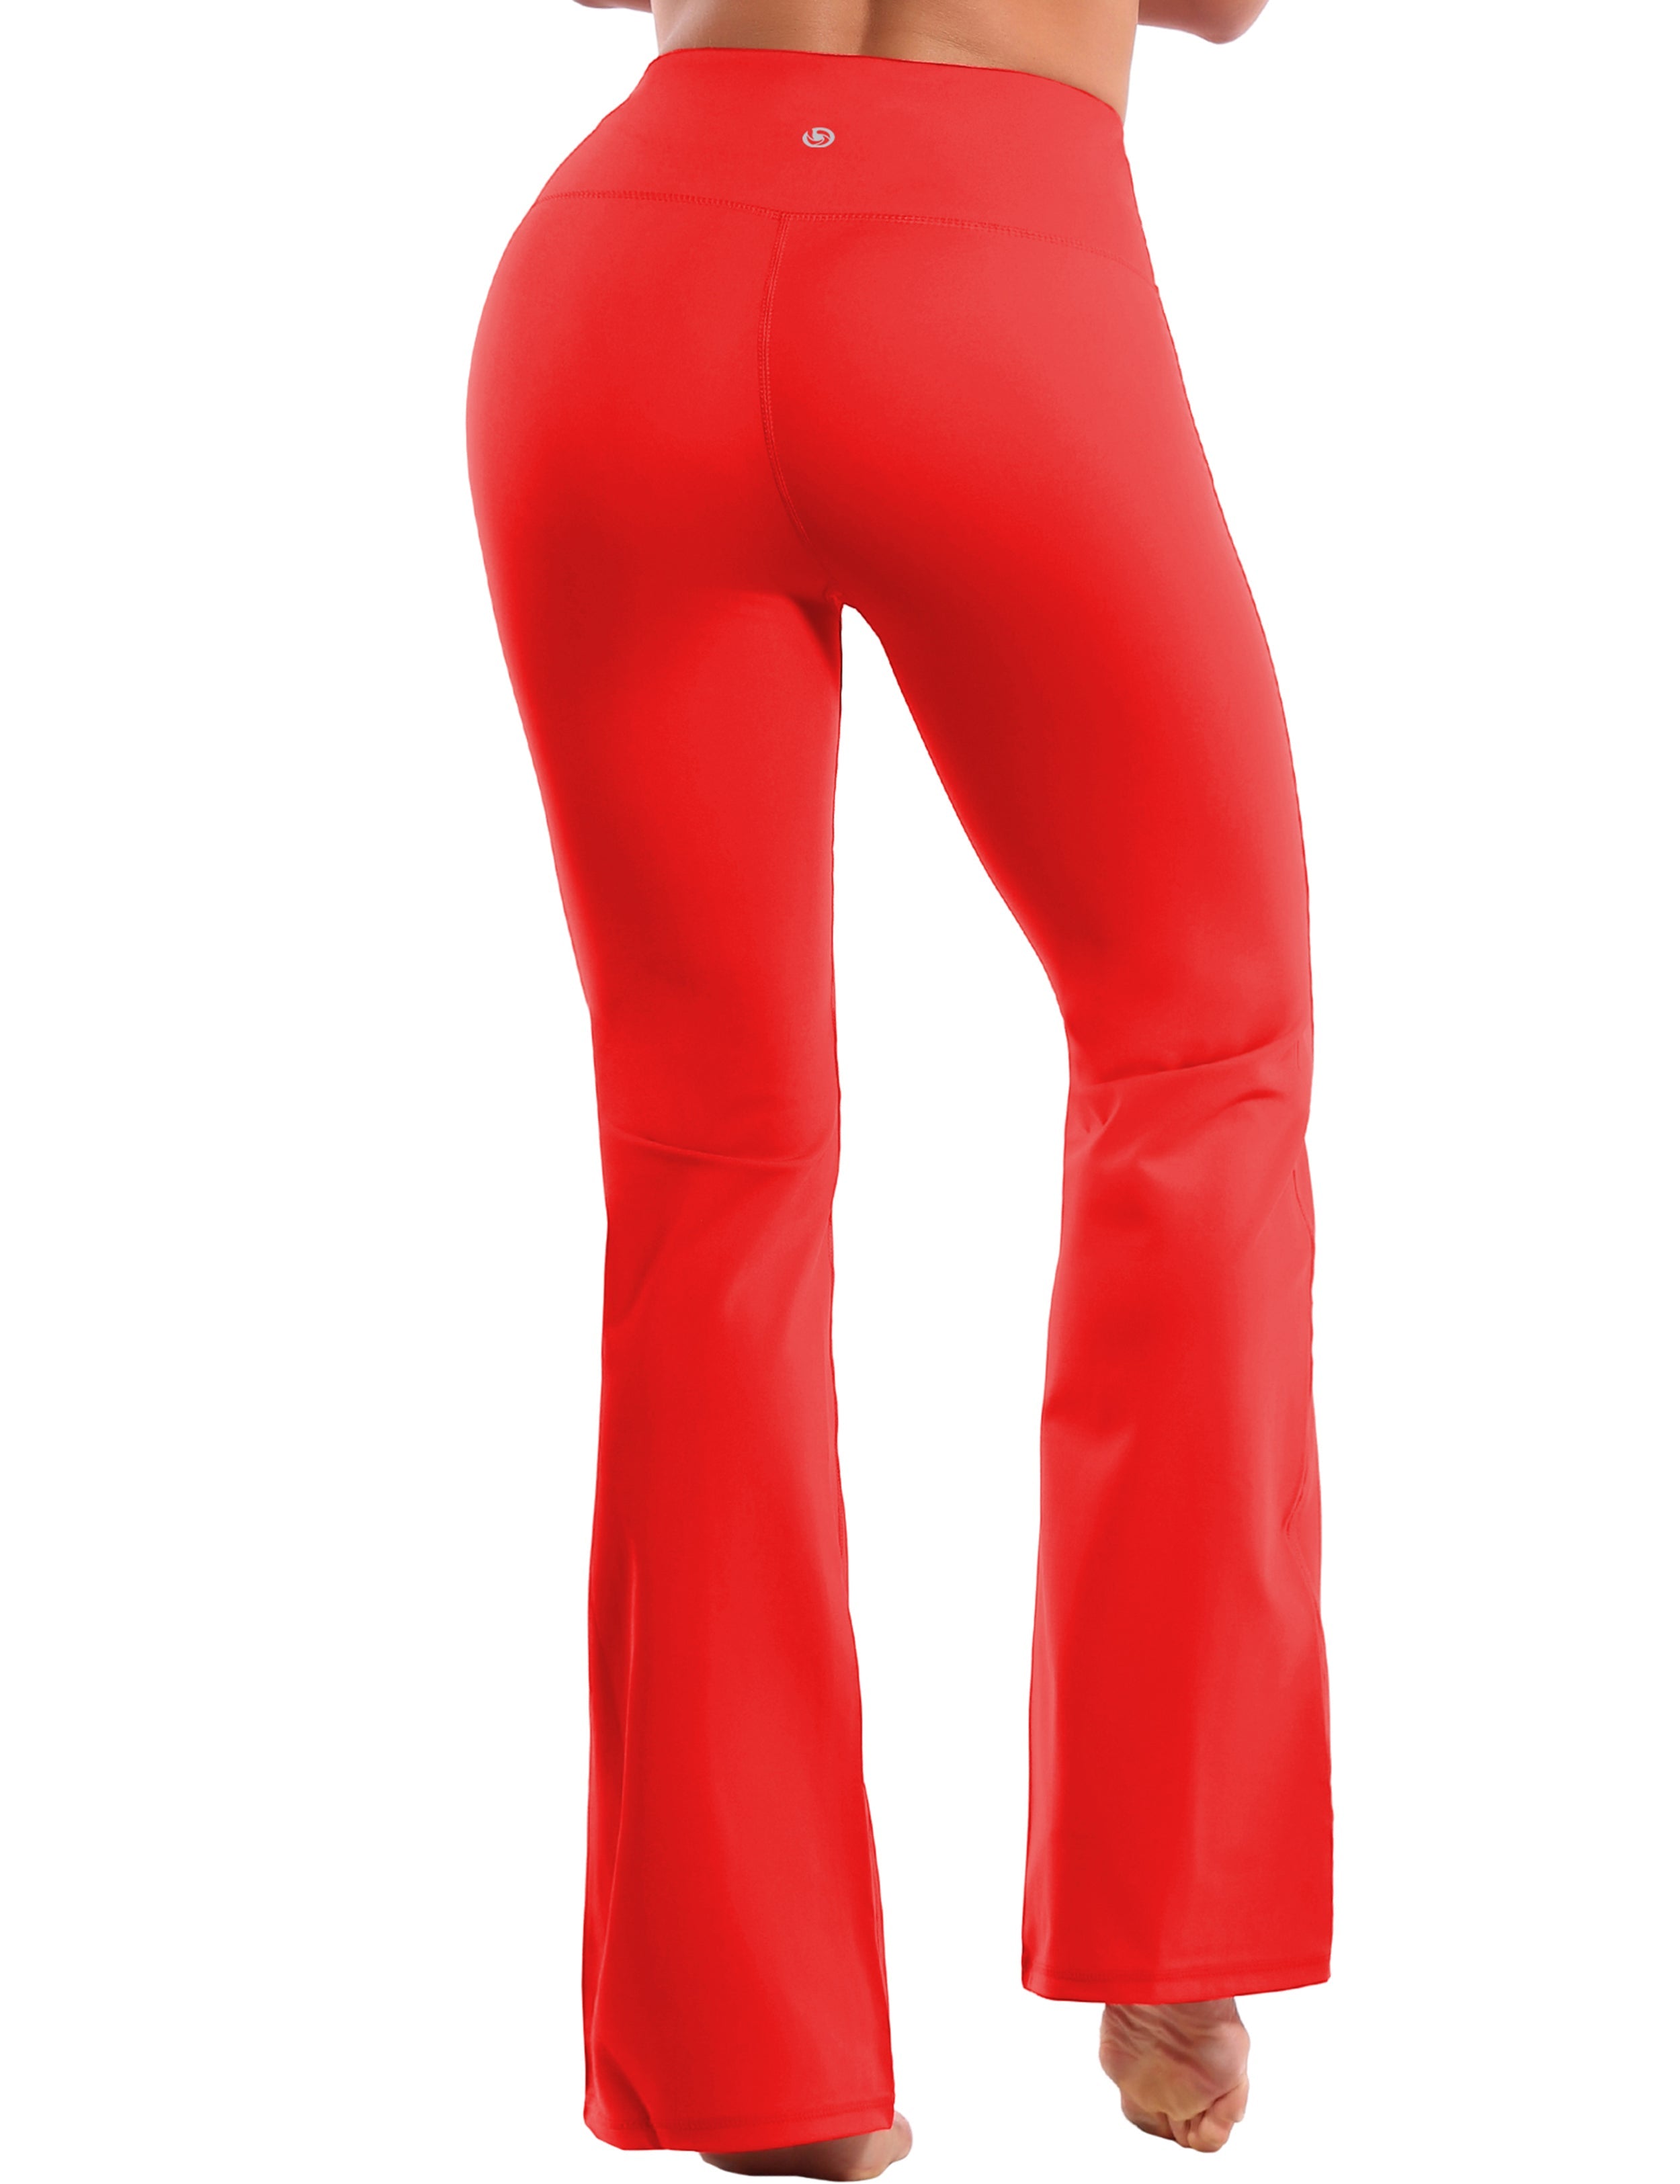 High Waist Bootcut Leggings Scarlet 75%Nylon/25%Spandex Fabric doesn't attract lint easily 4-way stretch No see-through Moisture-wicking Tummy control Inner pocket Five lengths